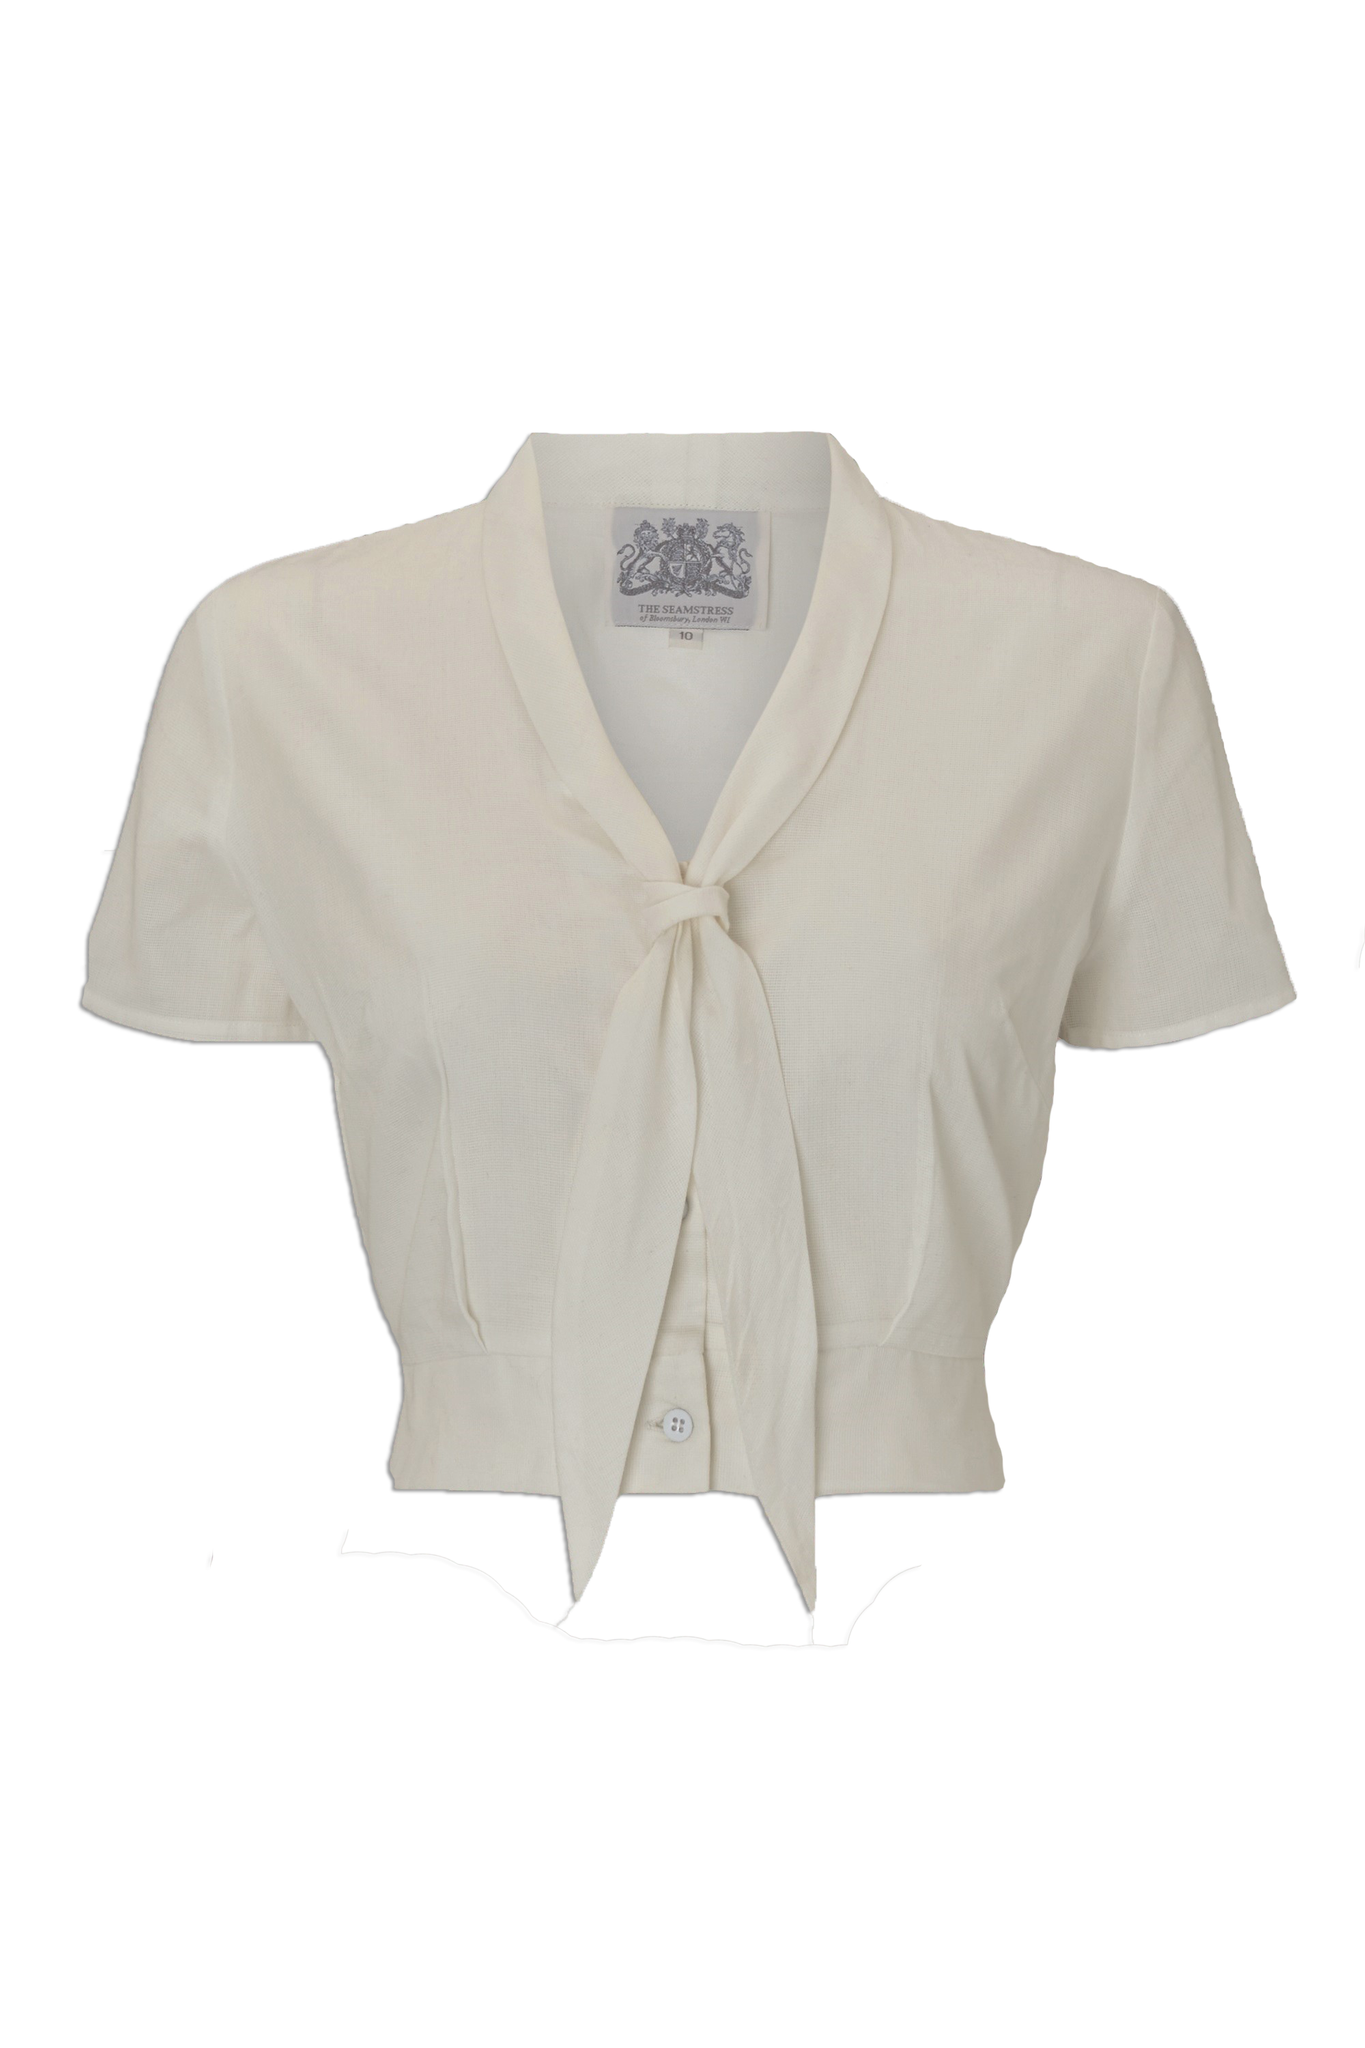 "Bonnie" Blouse Cream by The Seamstress of Bloomsbury, Classic 1940s Vintage Inspired Style - CC41, Goodwood Revival, Twinwood Festival, Viva Las Vegas Rockabilly Weekend Rock n Romance The Seamstress Of Bloomsbury